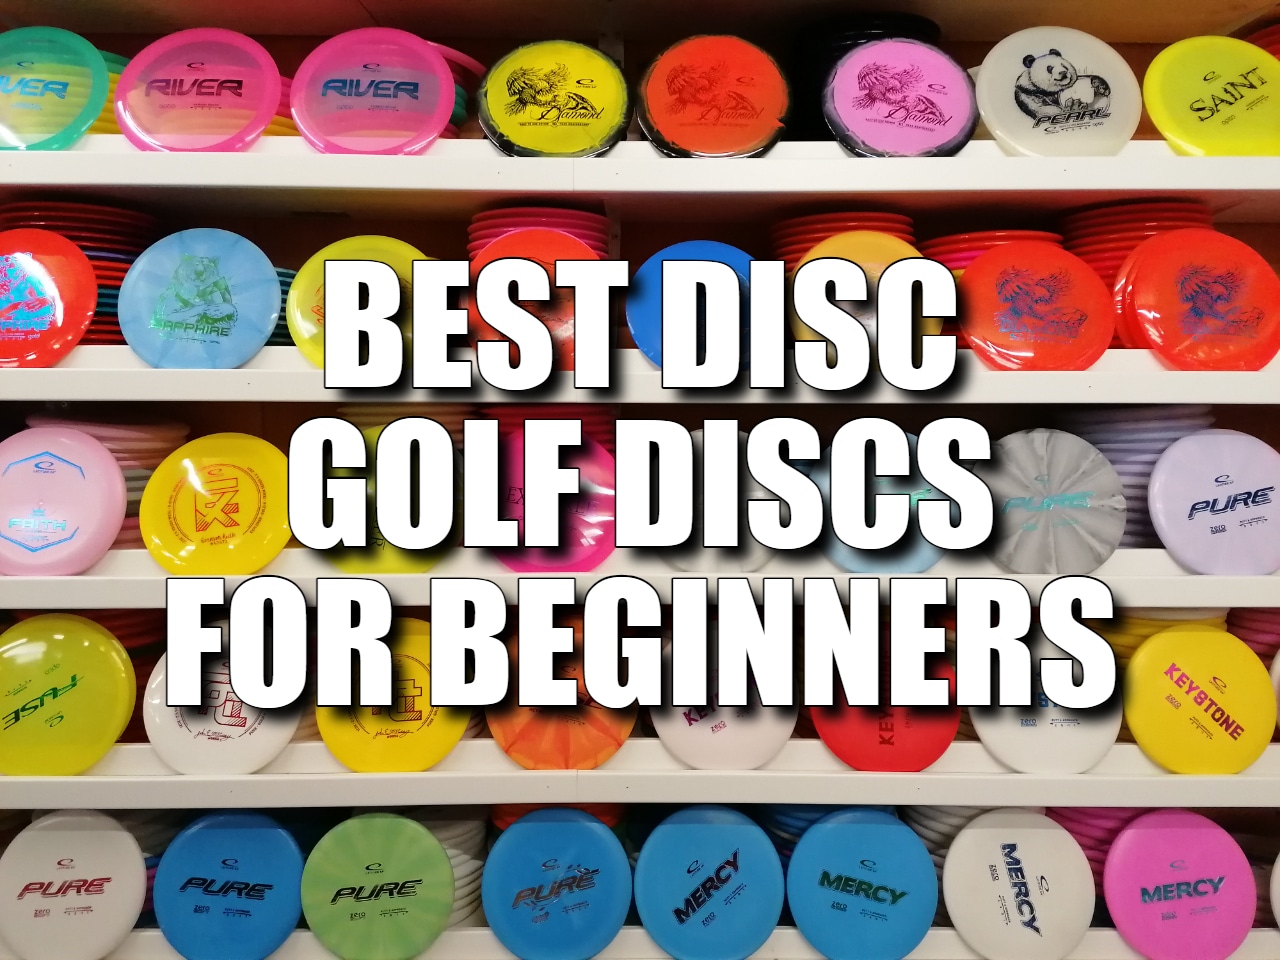 The Best disc golf discs for beginners - Grab these to improve